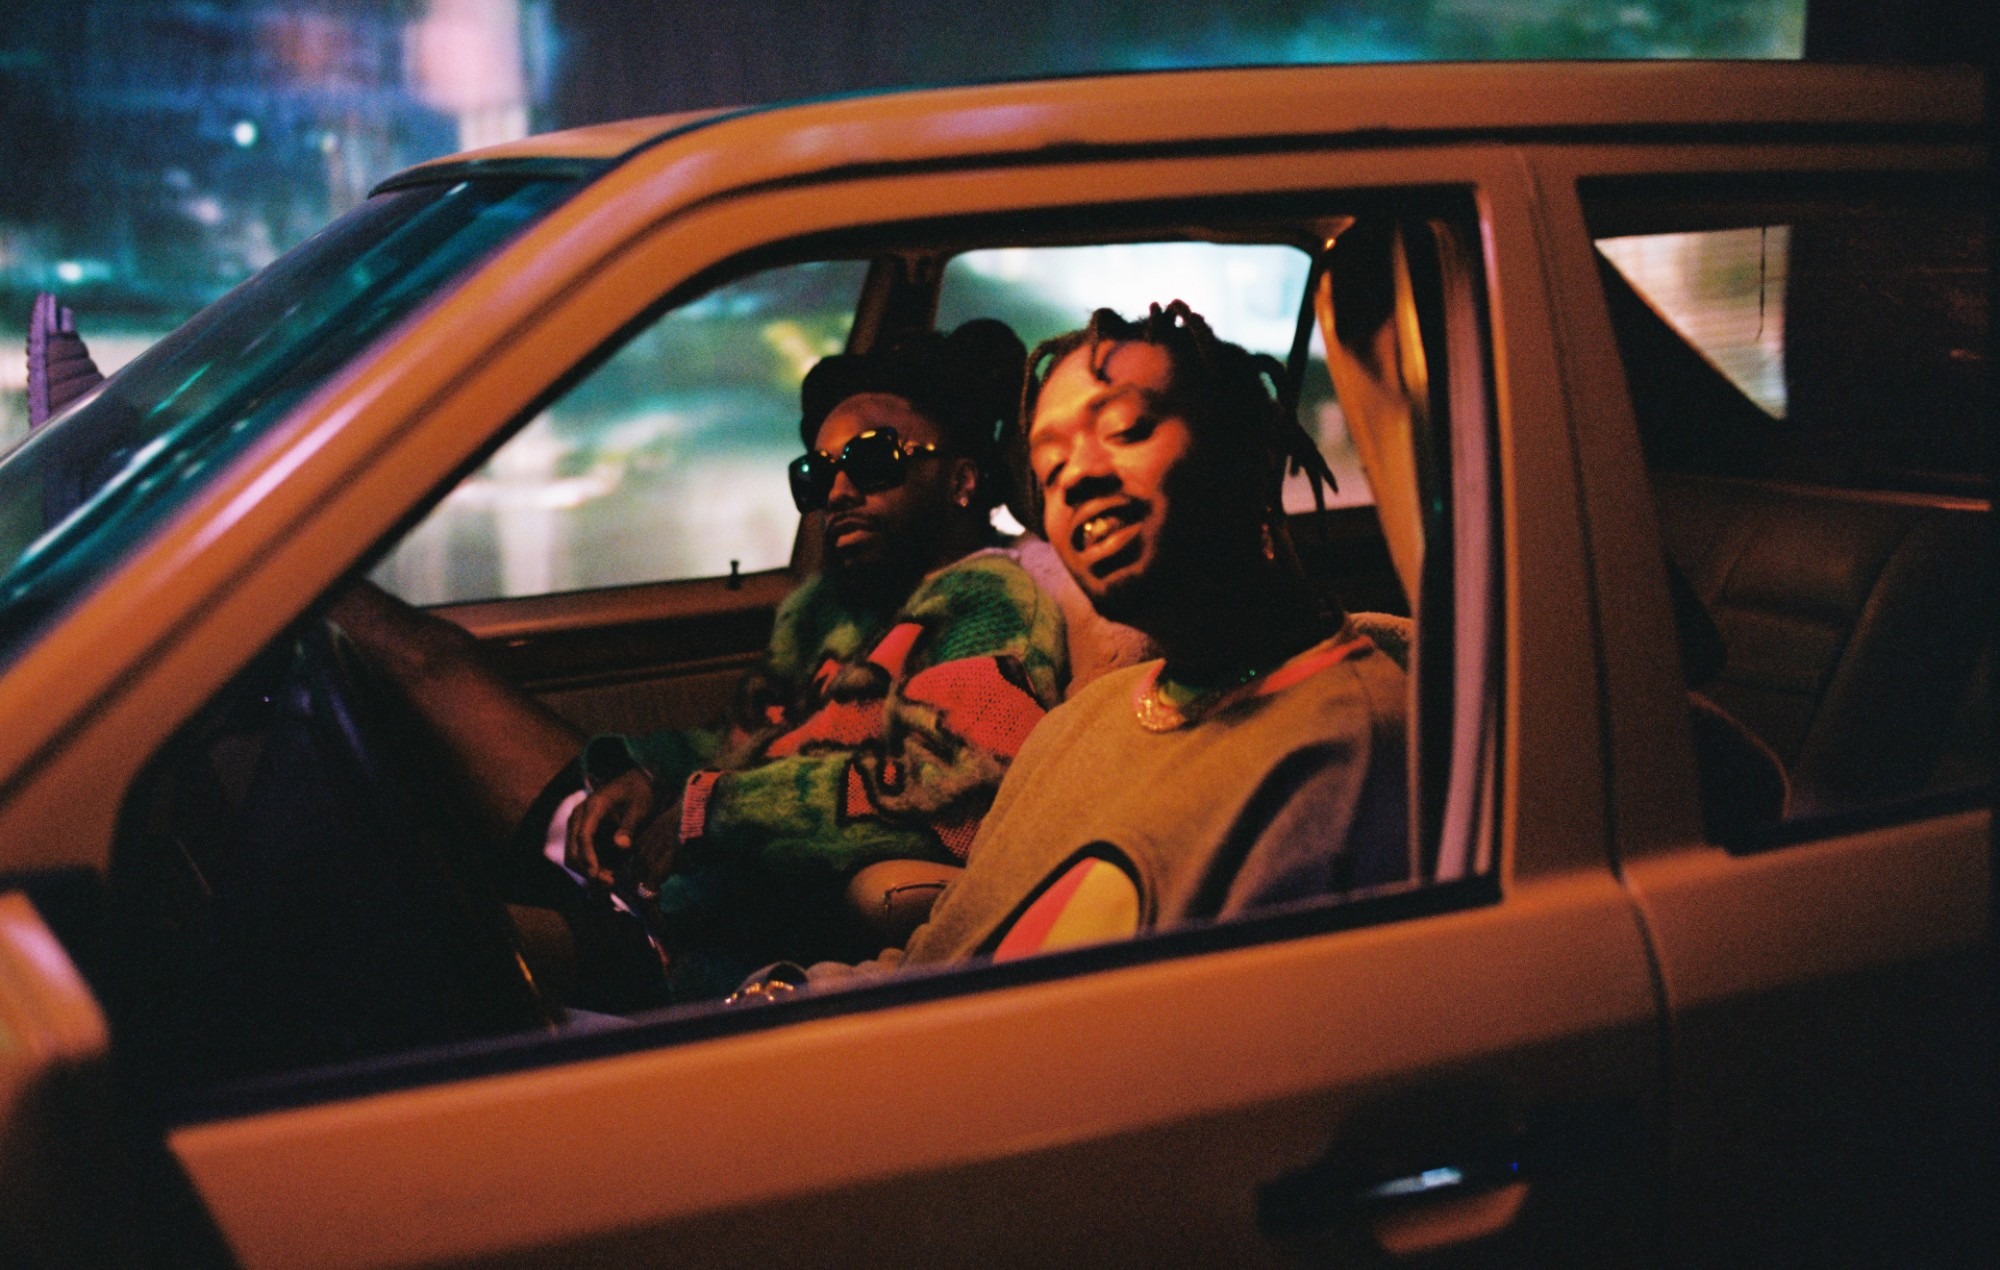 Atlanta’s experimental rap duo EarthGang: “We put our life up for sale. Why portray somebody else’s?”